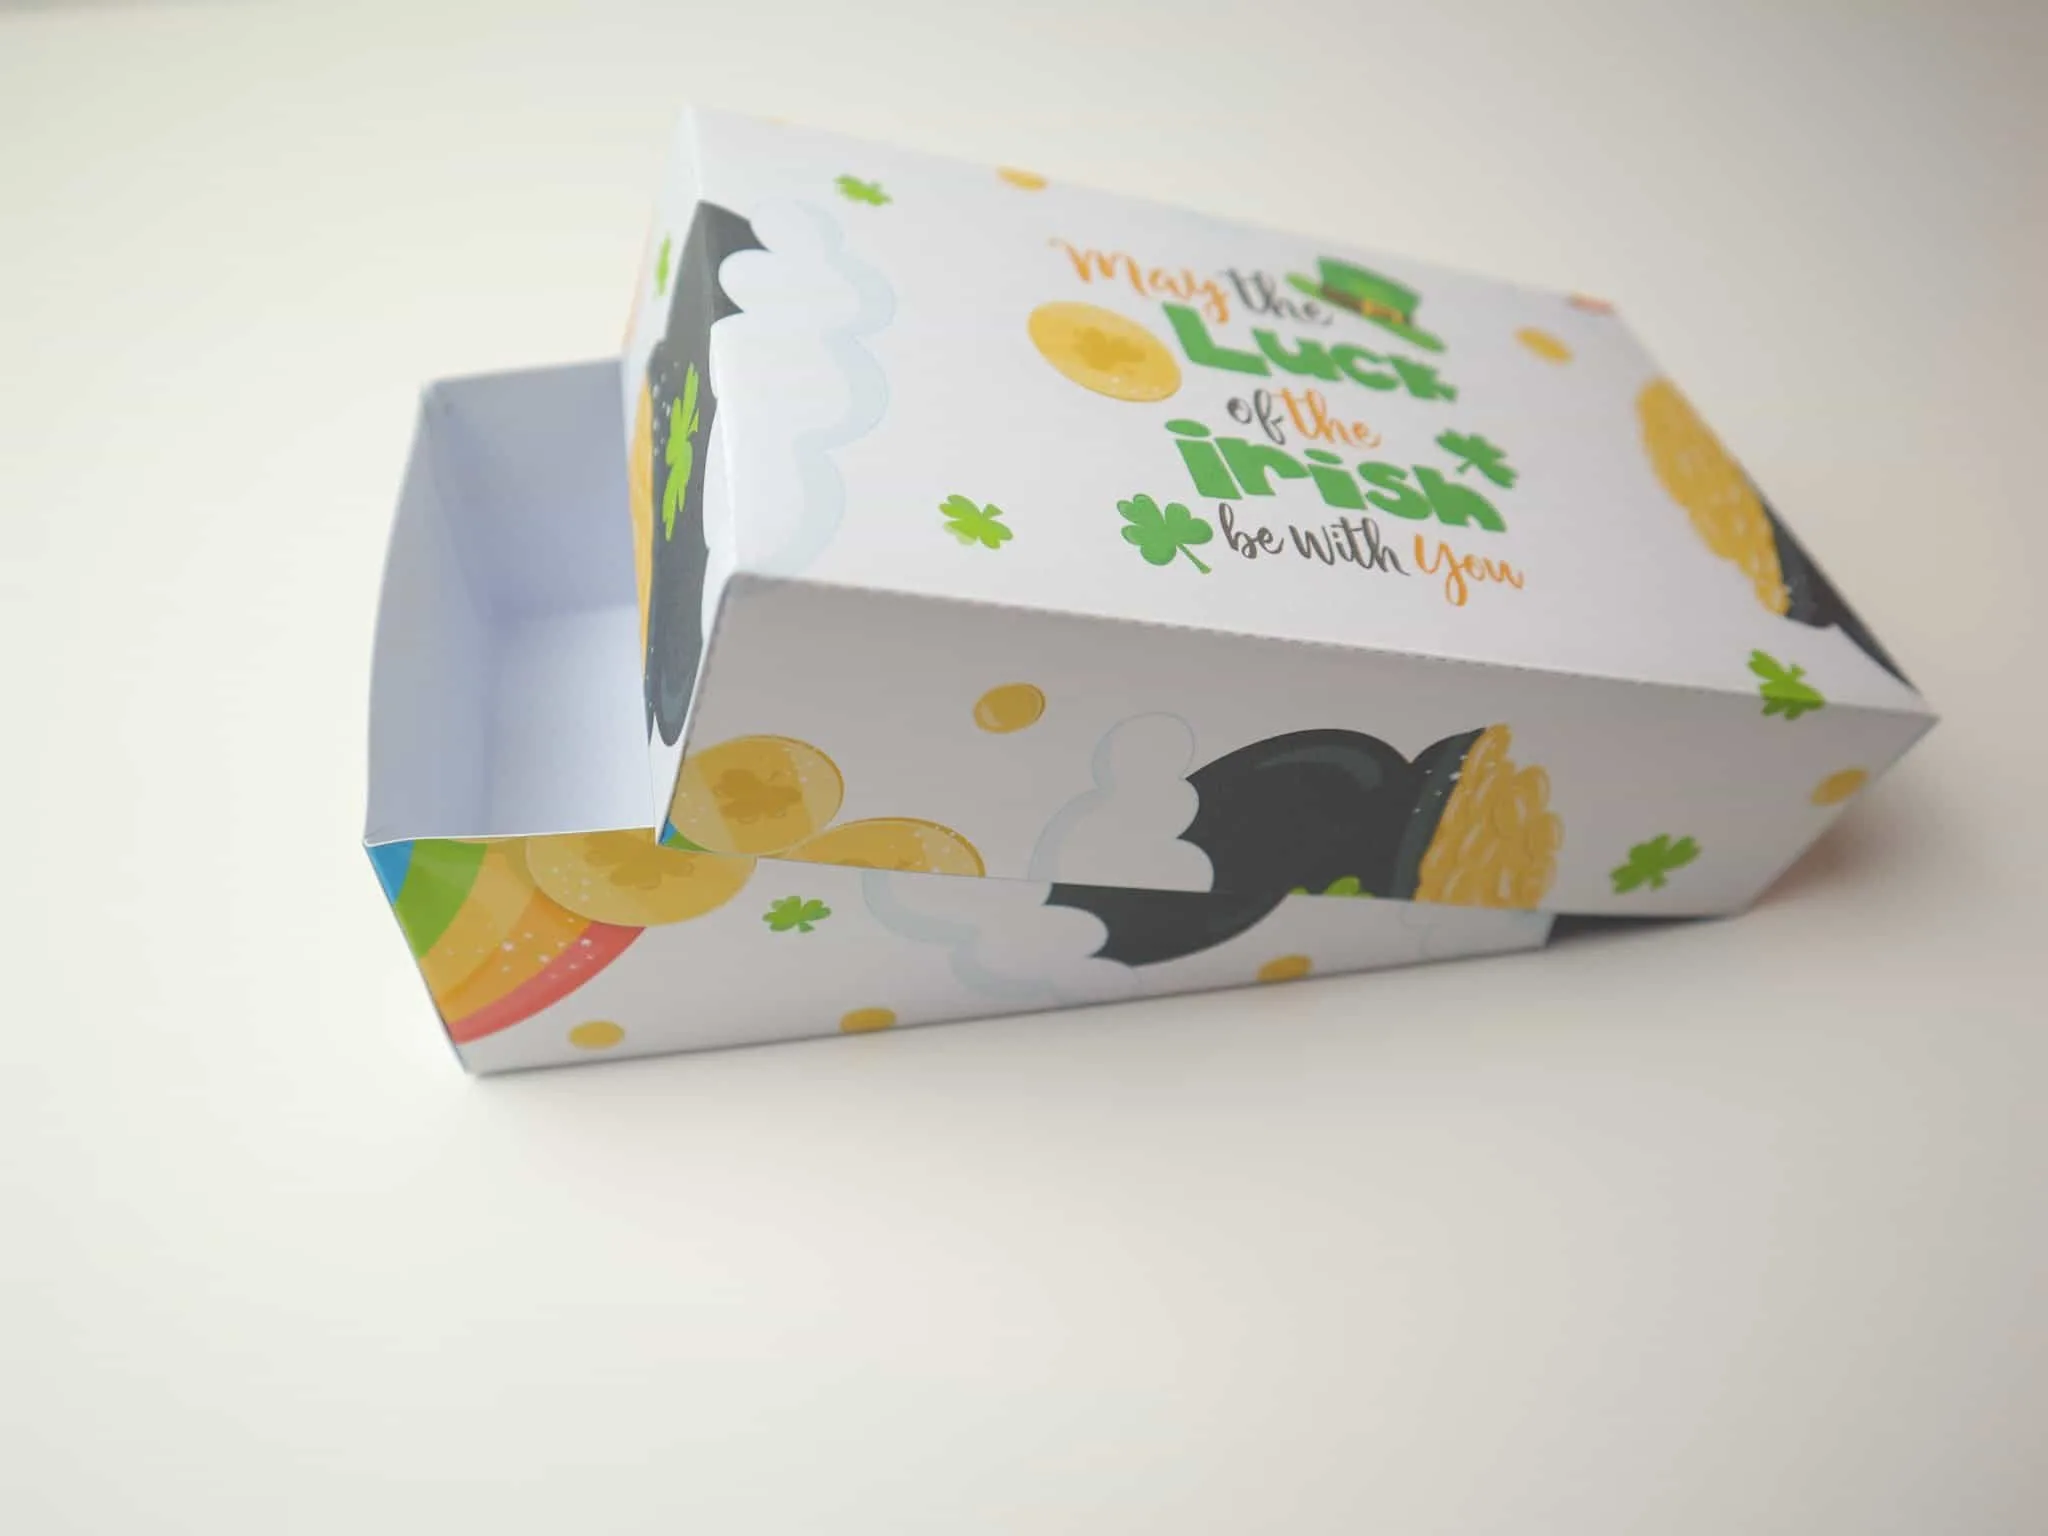 Place the cover on top of the St. Patrick's Day Box